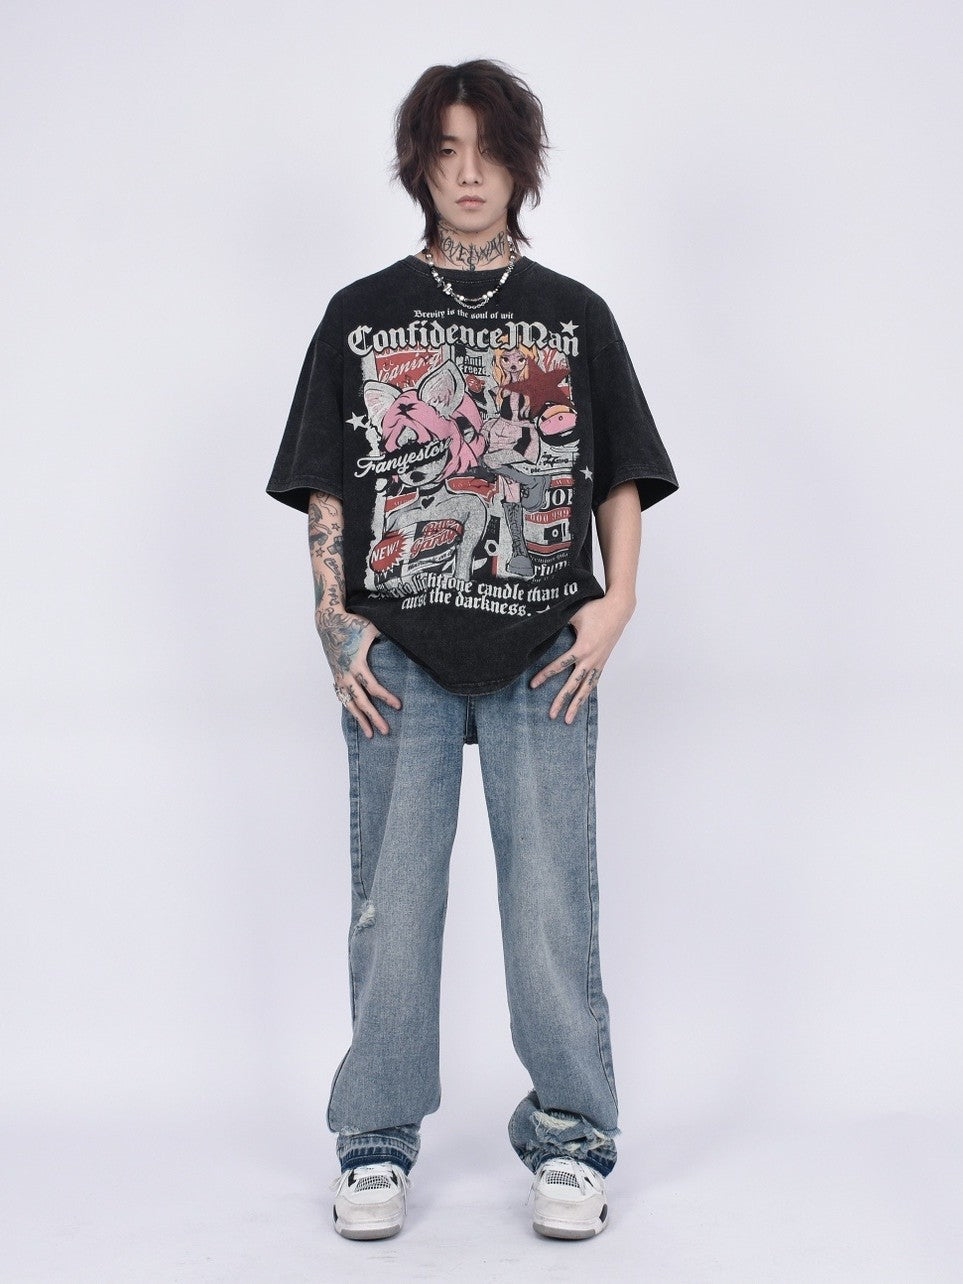 Confidence, Man T-Shirt. Vintage wash. y2k aesthetic eboy streetwear outfits 